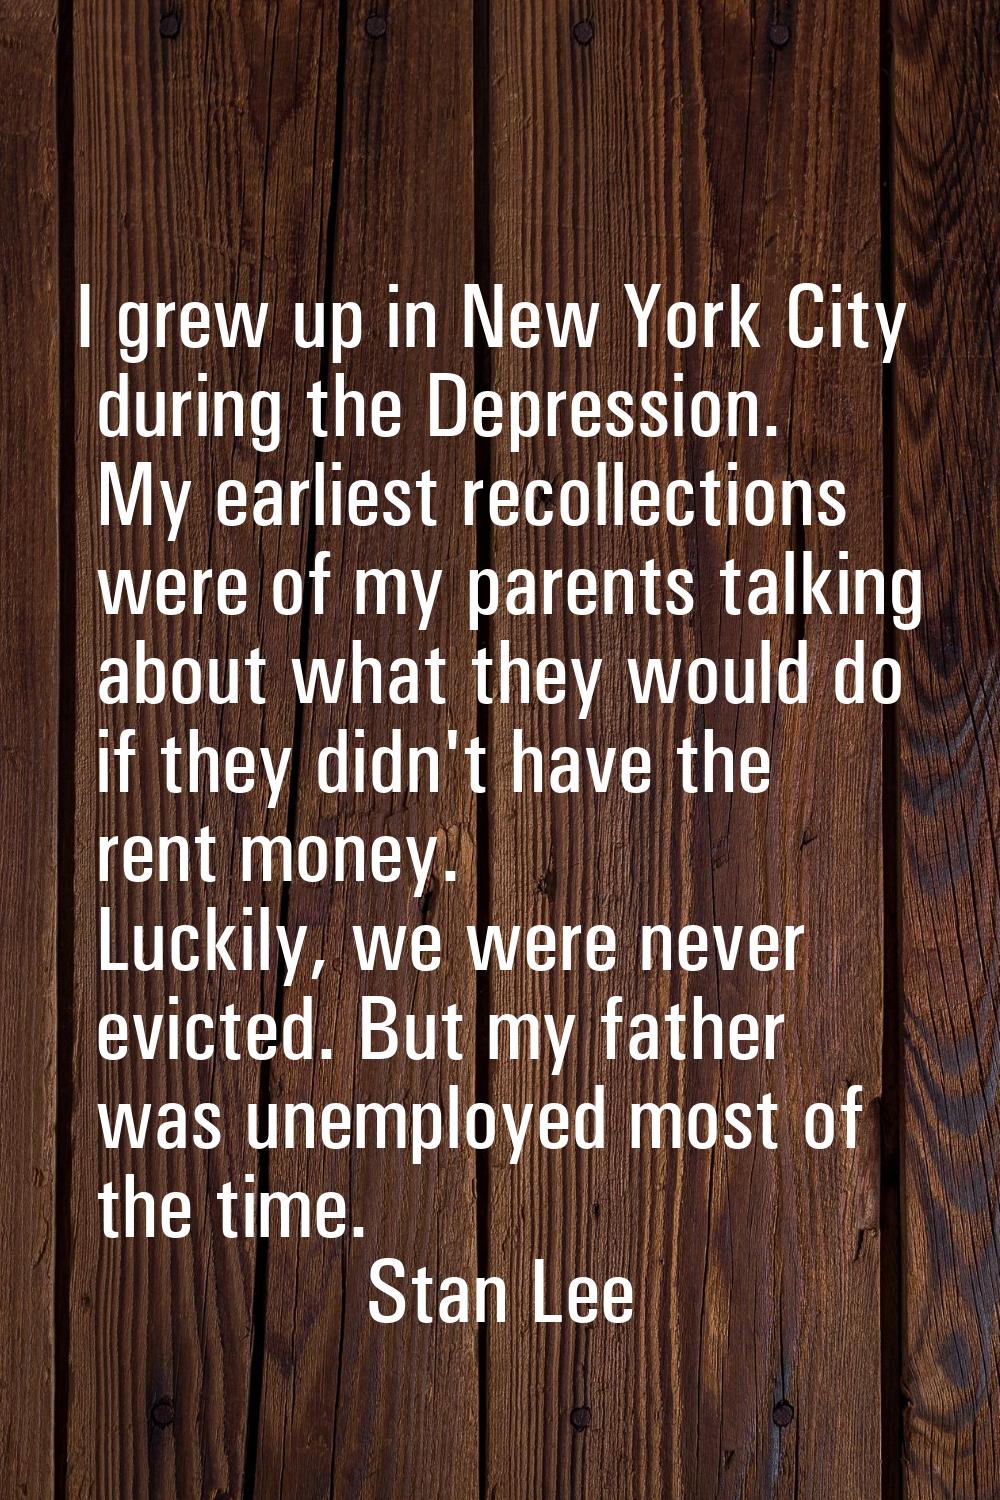 I grew up in New York City during the Depression. My earliest recollections were of my parents talk